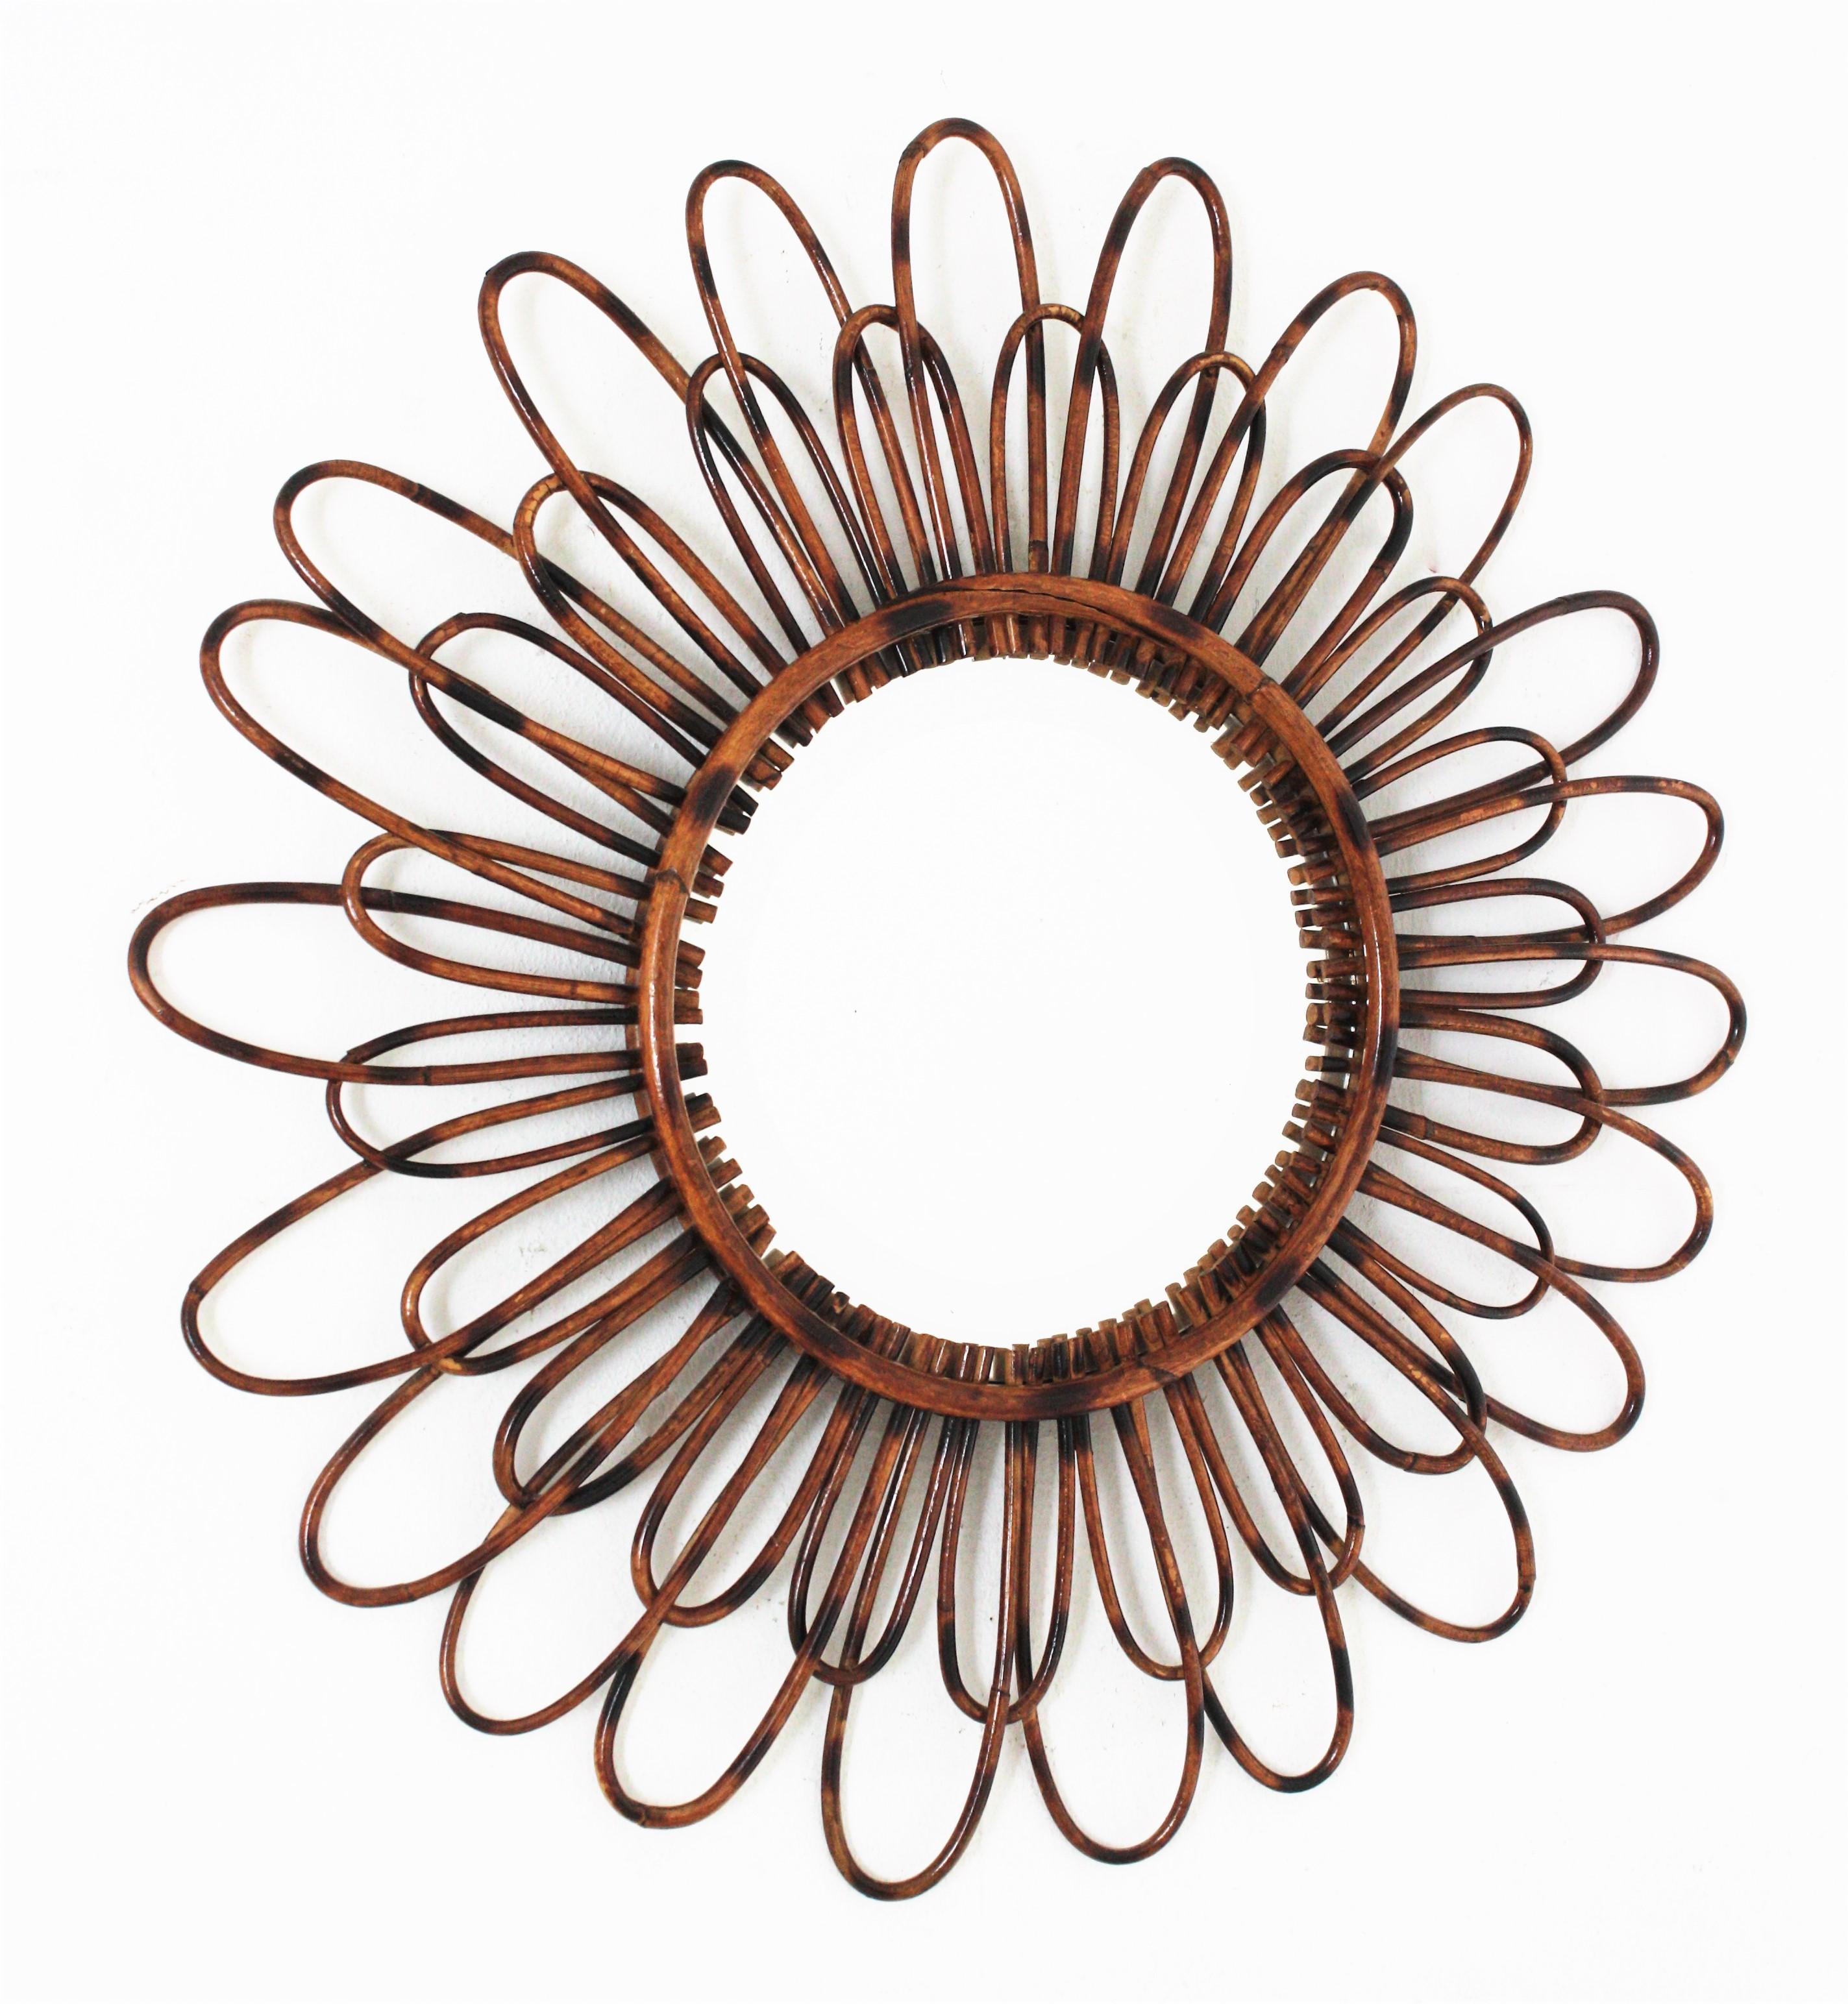 Handcrafted rattan double layered flower shaped mirror / sunburst mirror, Spain, 1950s
A lovely Mediterranean style handcrafted rattan flower shaped mirror with two layers of petals in two sizes and pyrography accents.
Beautiful to place alone and